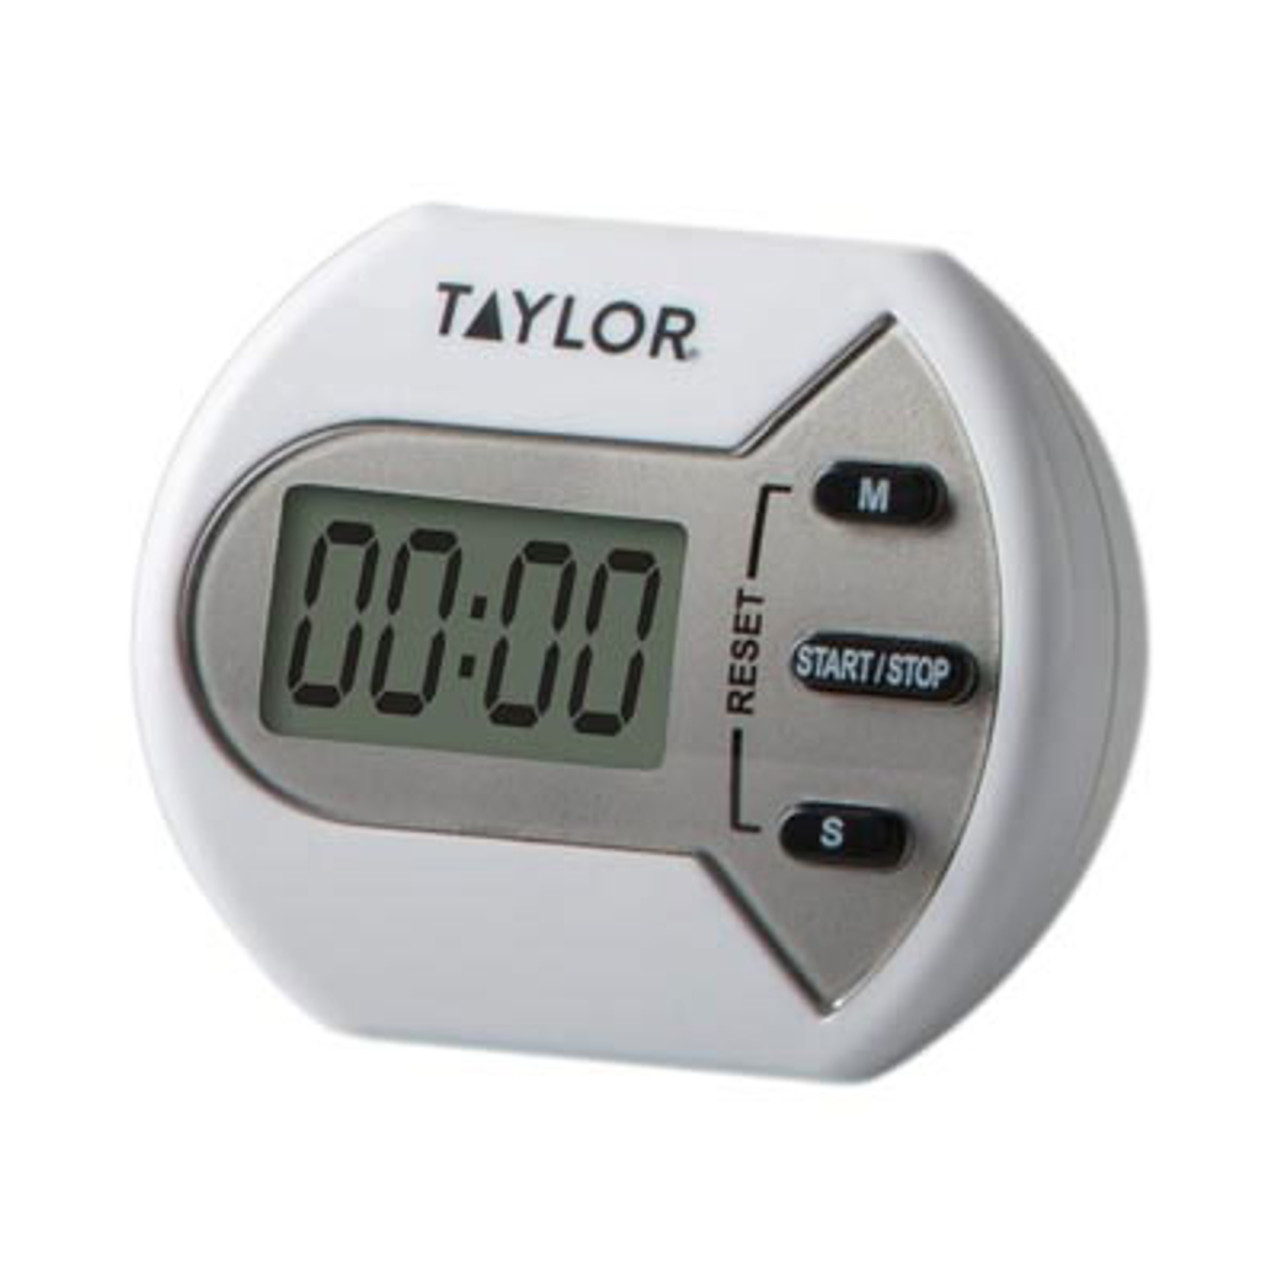 Taylor Digital Cooking Probe Thermometer & Timer -Tested - with original  package